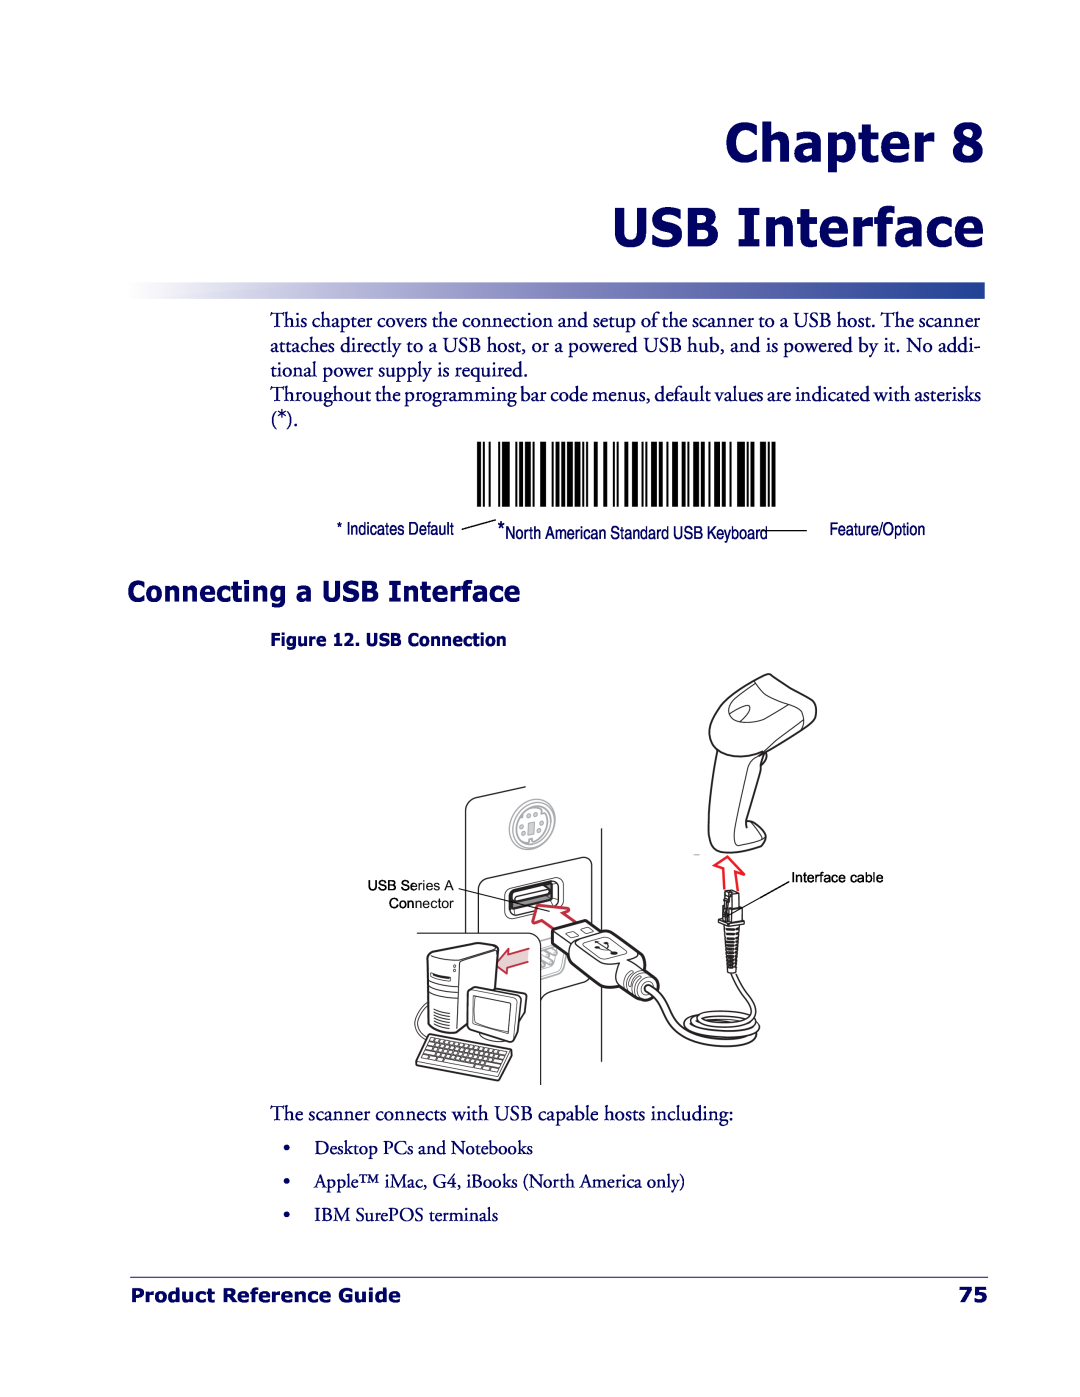 Datalogic Scanning QD 2300 manual Chapter USB Interface, Connecting a USB Interface 